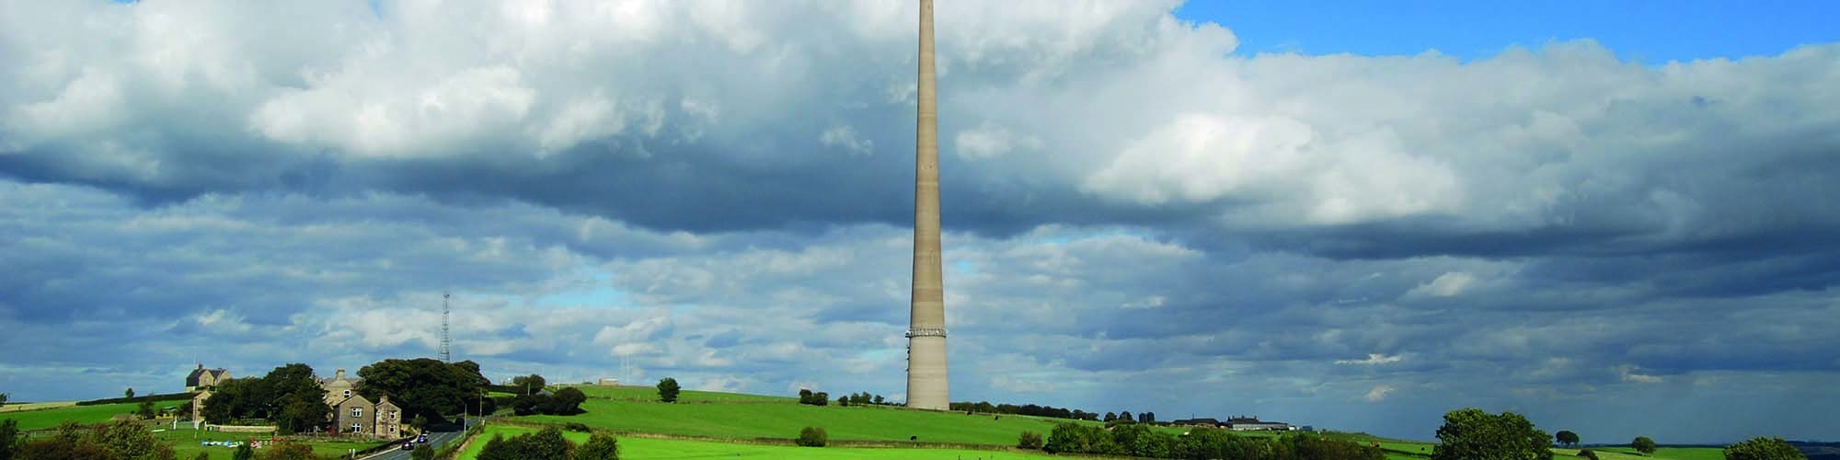 Emley Moore Television Tower